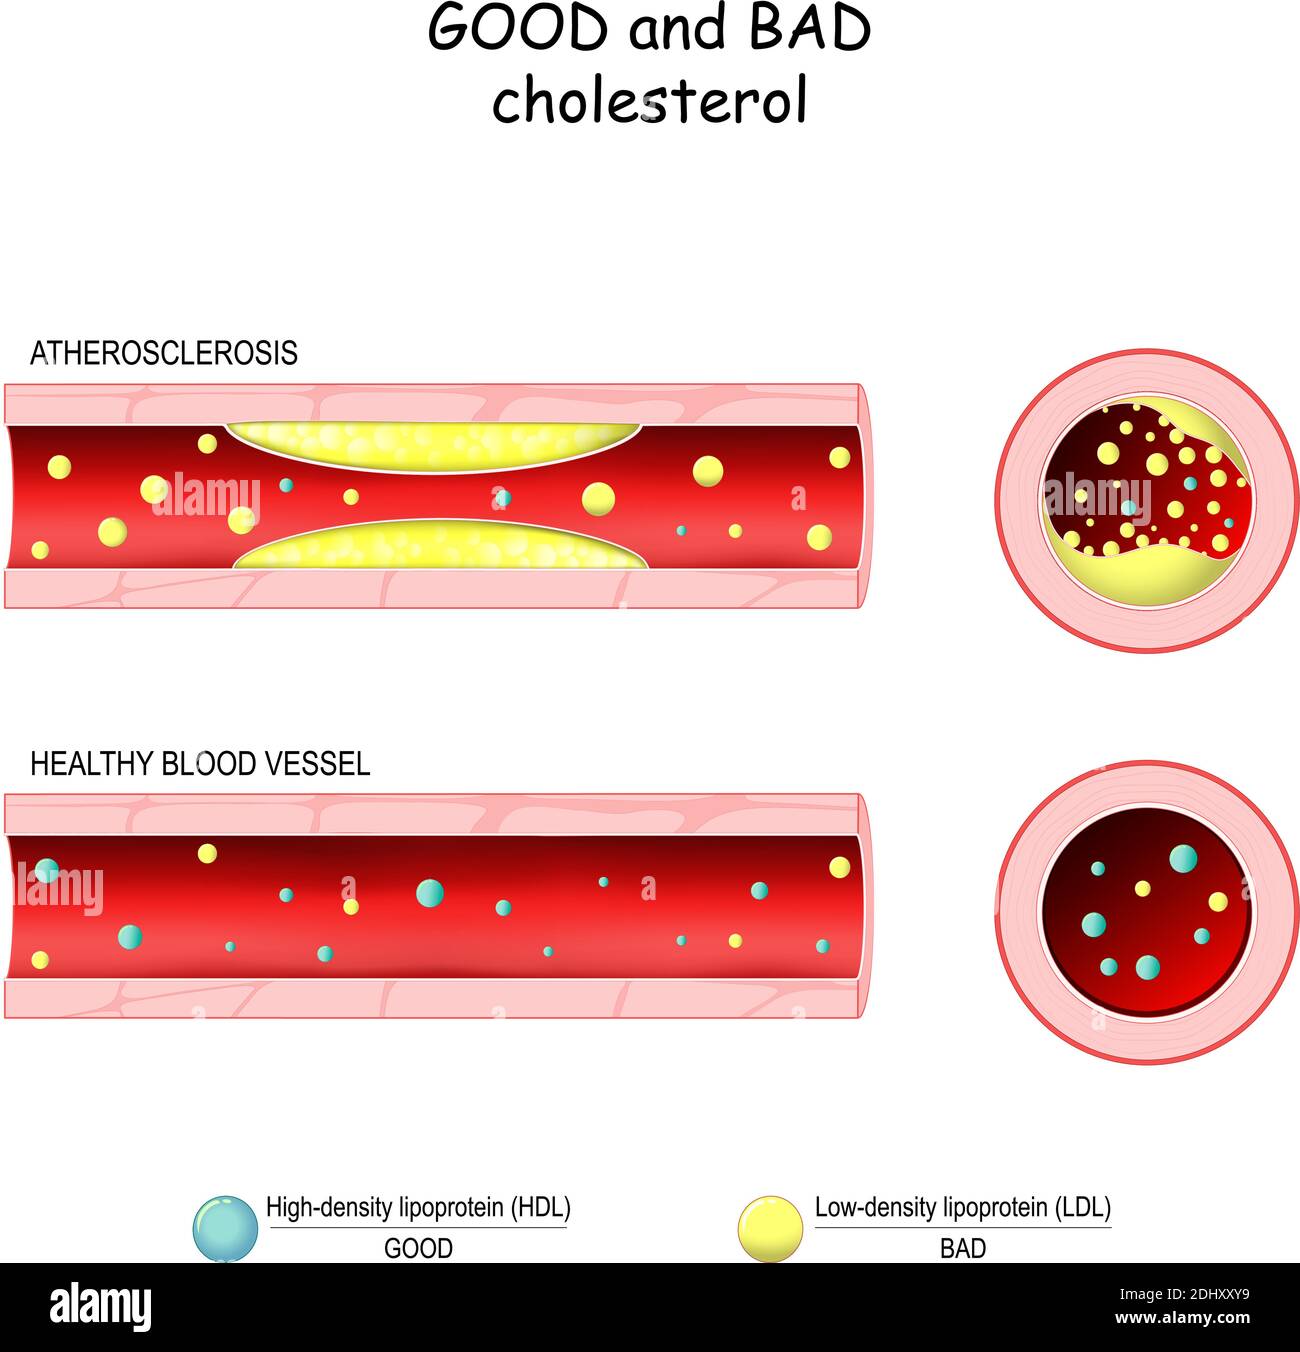 good (HDL) and bad (LDL) cholesterol. Healthy blood vessel and Atherosclerosis. Cross section of blood vessel. Low-density, High-density lipoprotein Stock Vector